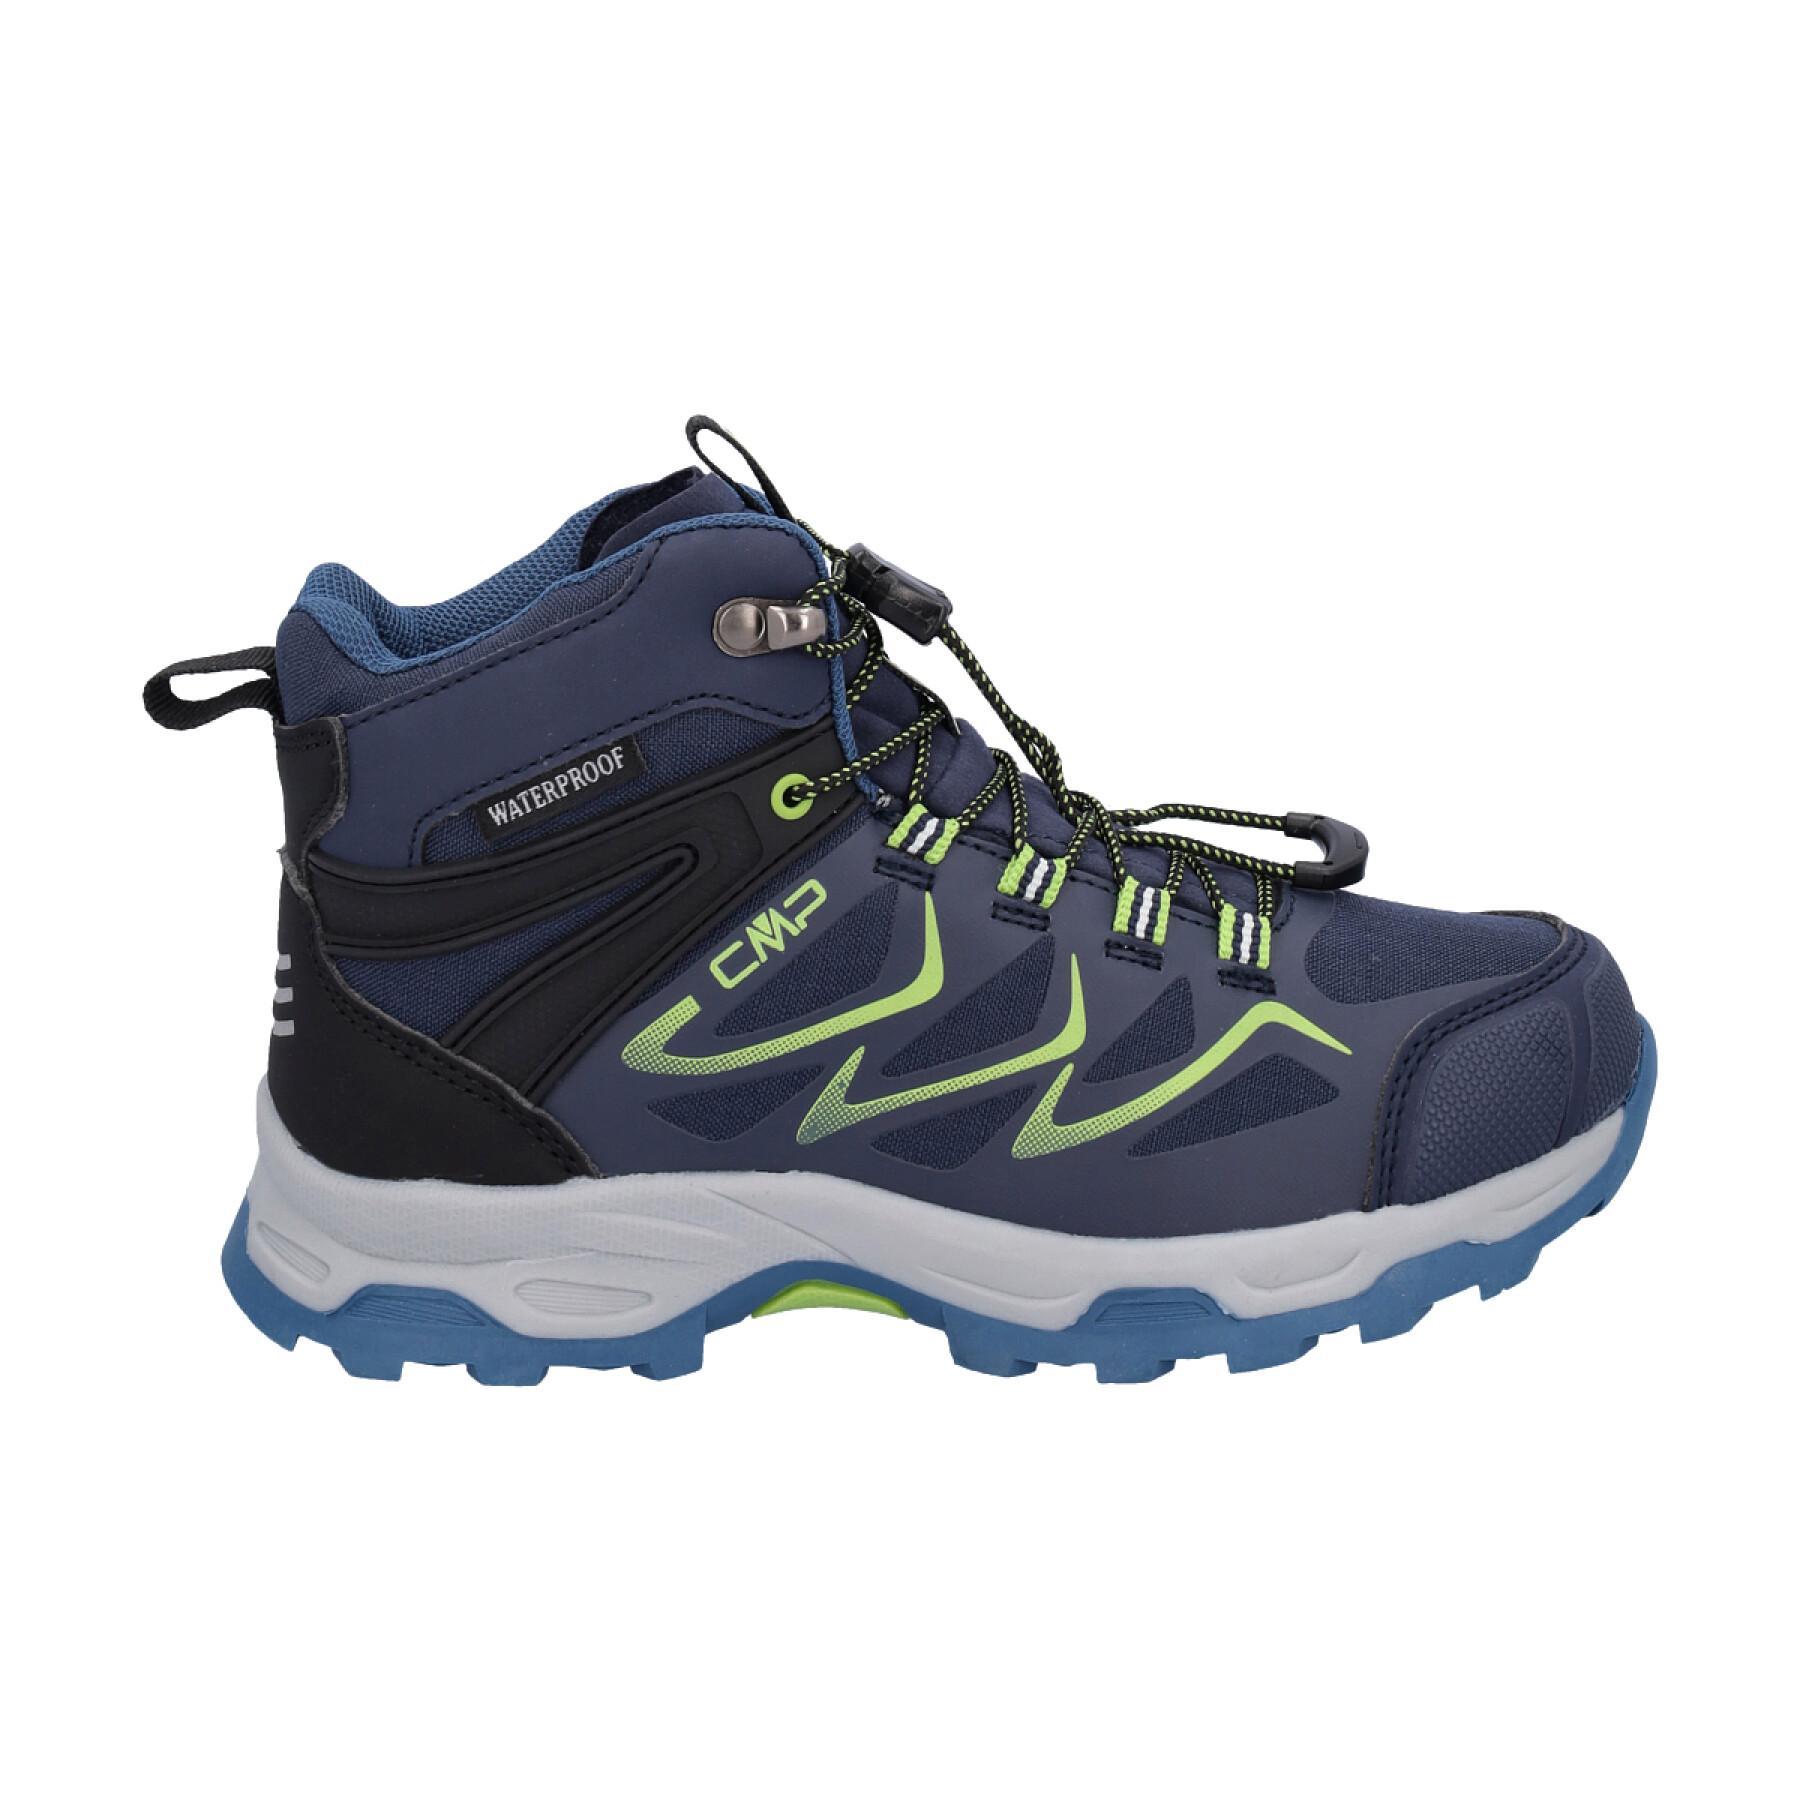 Mid hiking shoes for children CMP Byne Waterproof